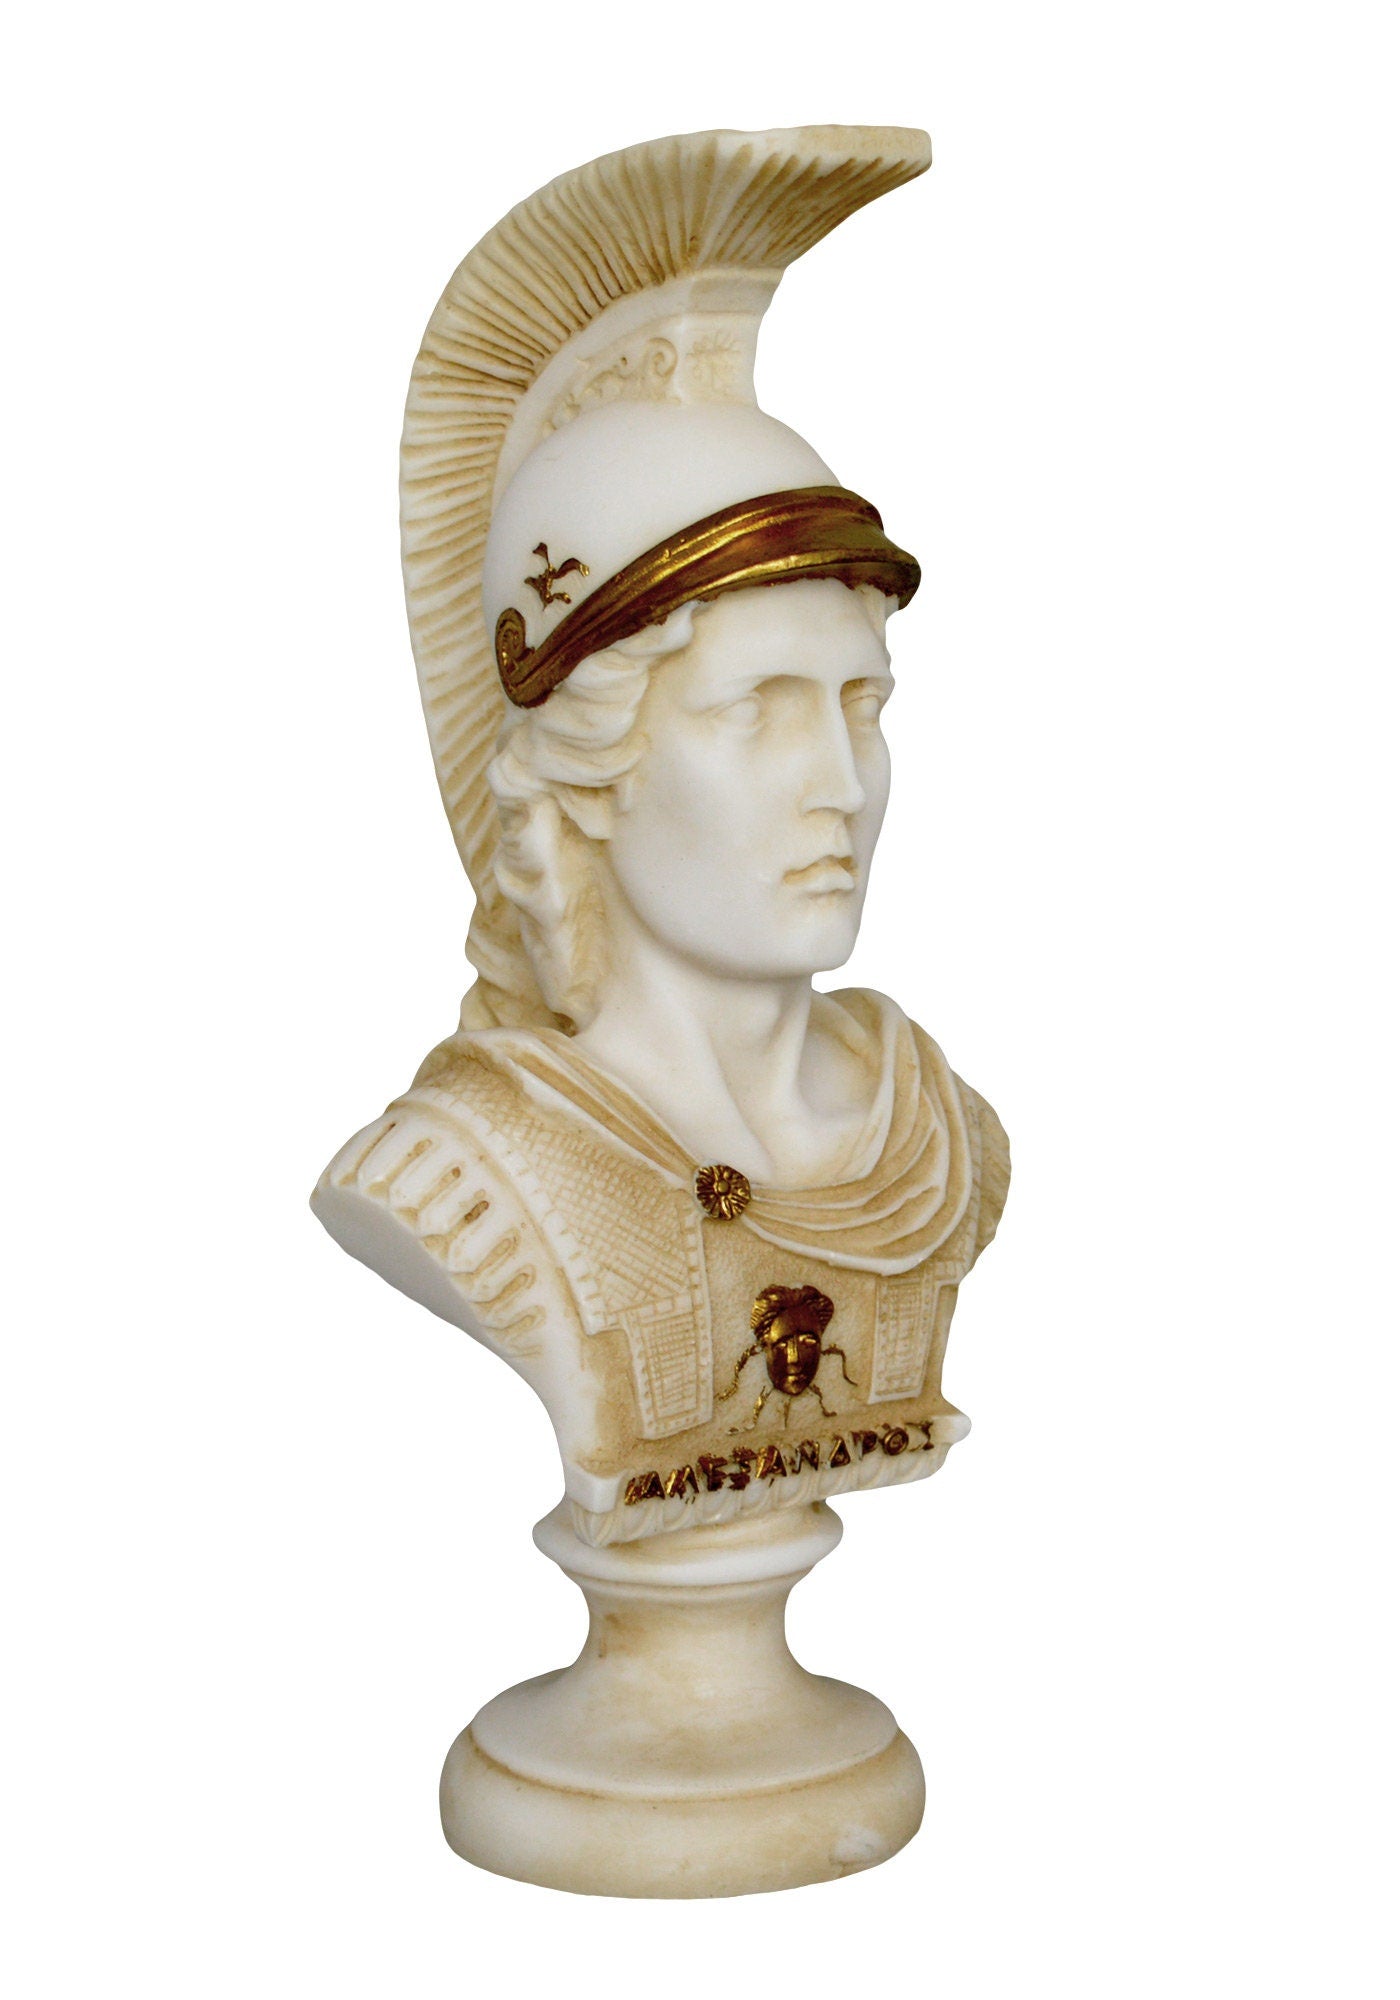 Alexander the Great Bust - King of Macedonia - 356–323 BC - Son of Philip - Visionary Leader - Student of Aristotle  - Aged Alabaster Statue